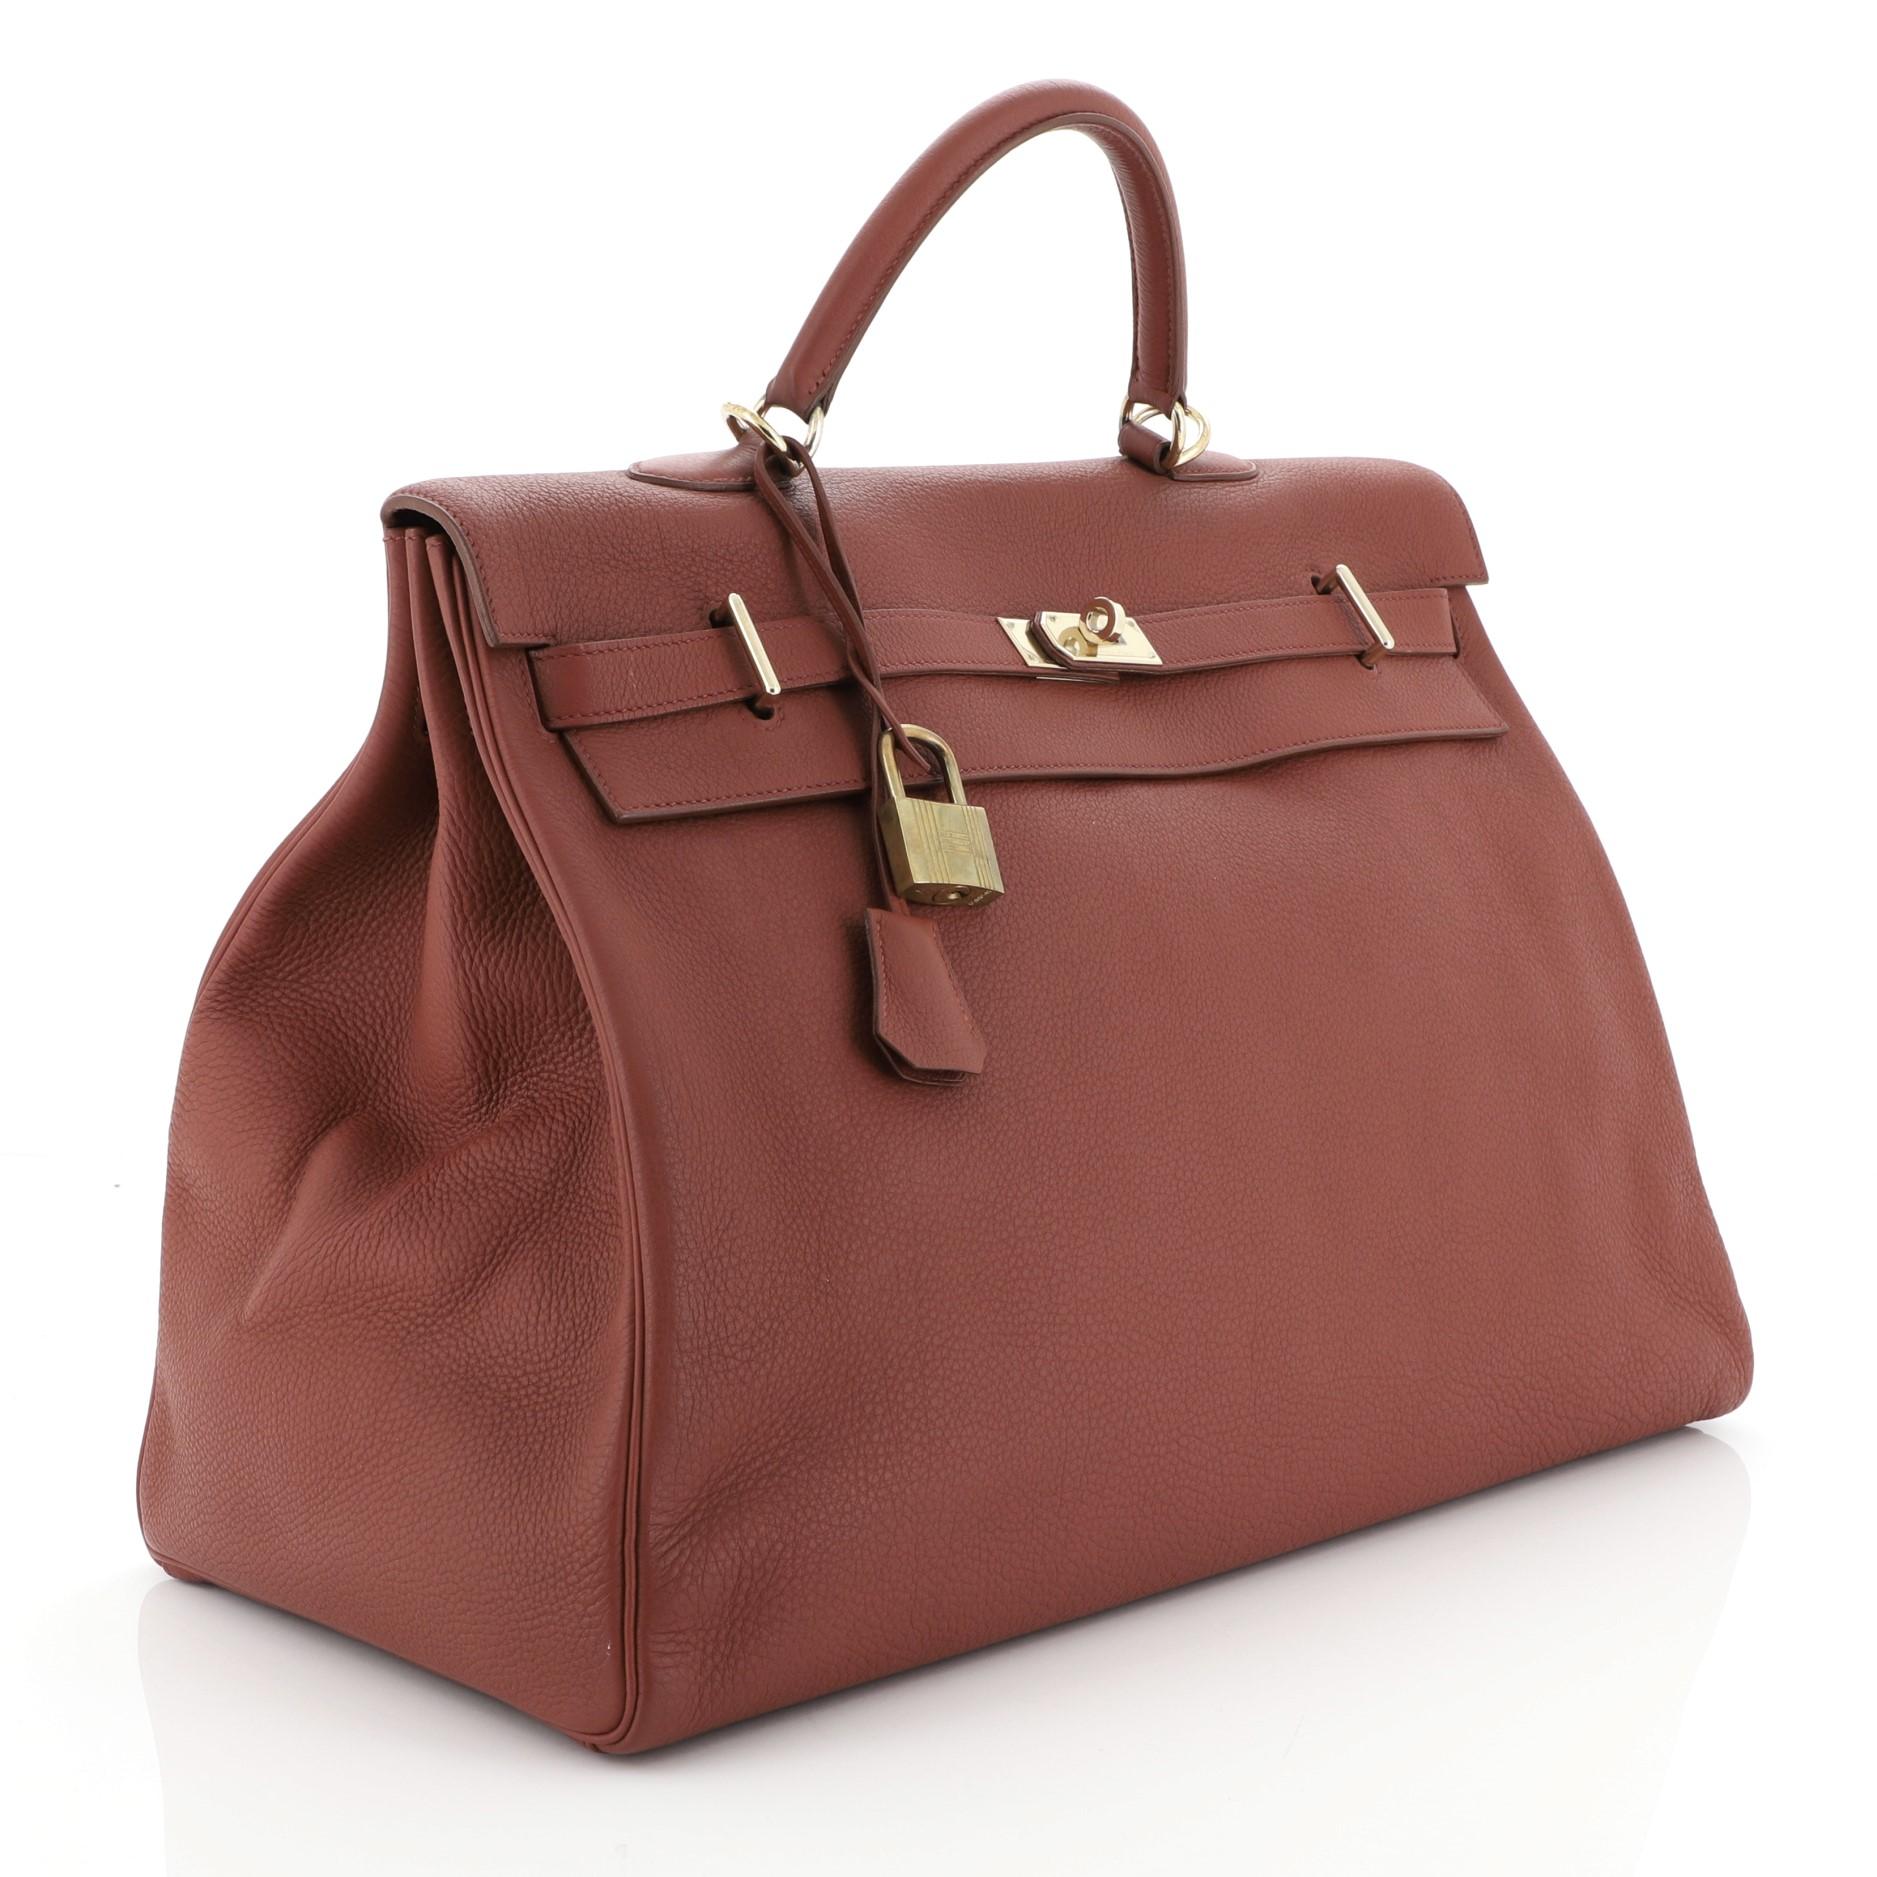 This Hermes Kelly Travel Handbag Brique Togo with Gold Hardware 50, crafted in Brique Togo leather, features a single top handle, protective base studs and gold hardware. Its turn-lock closure opens to a Brique Chevre leather interior with zip and